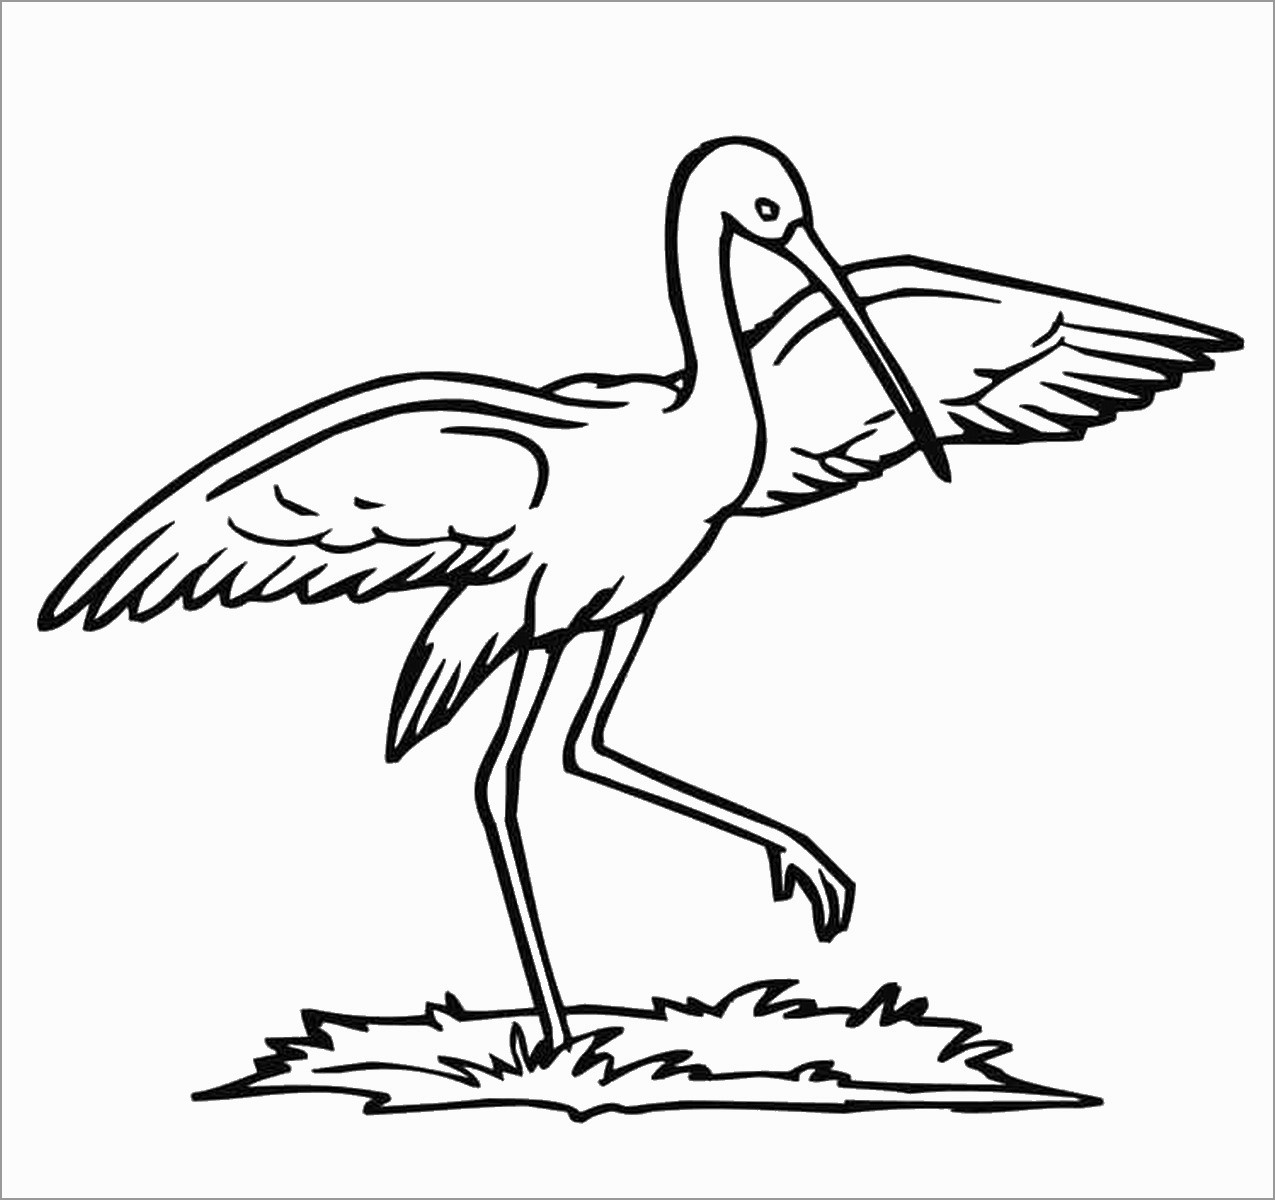 Easy Storks Coloring Page to Print